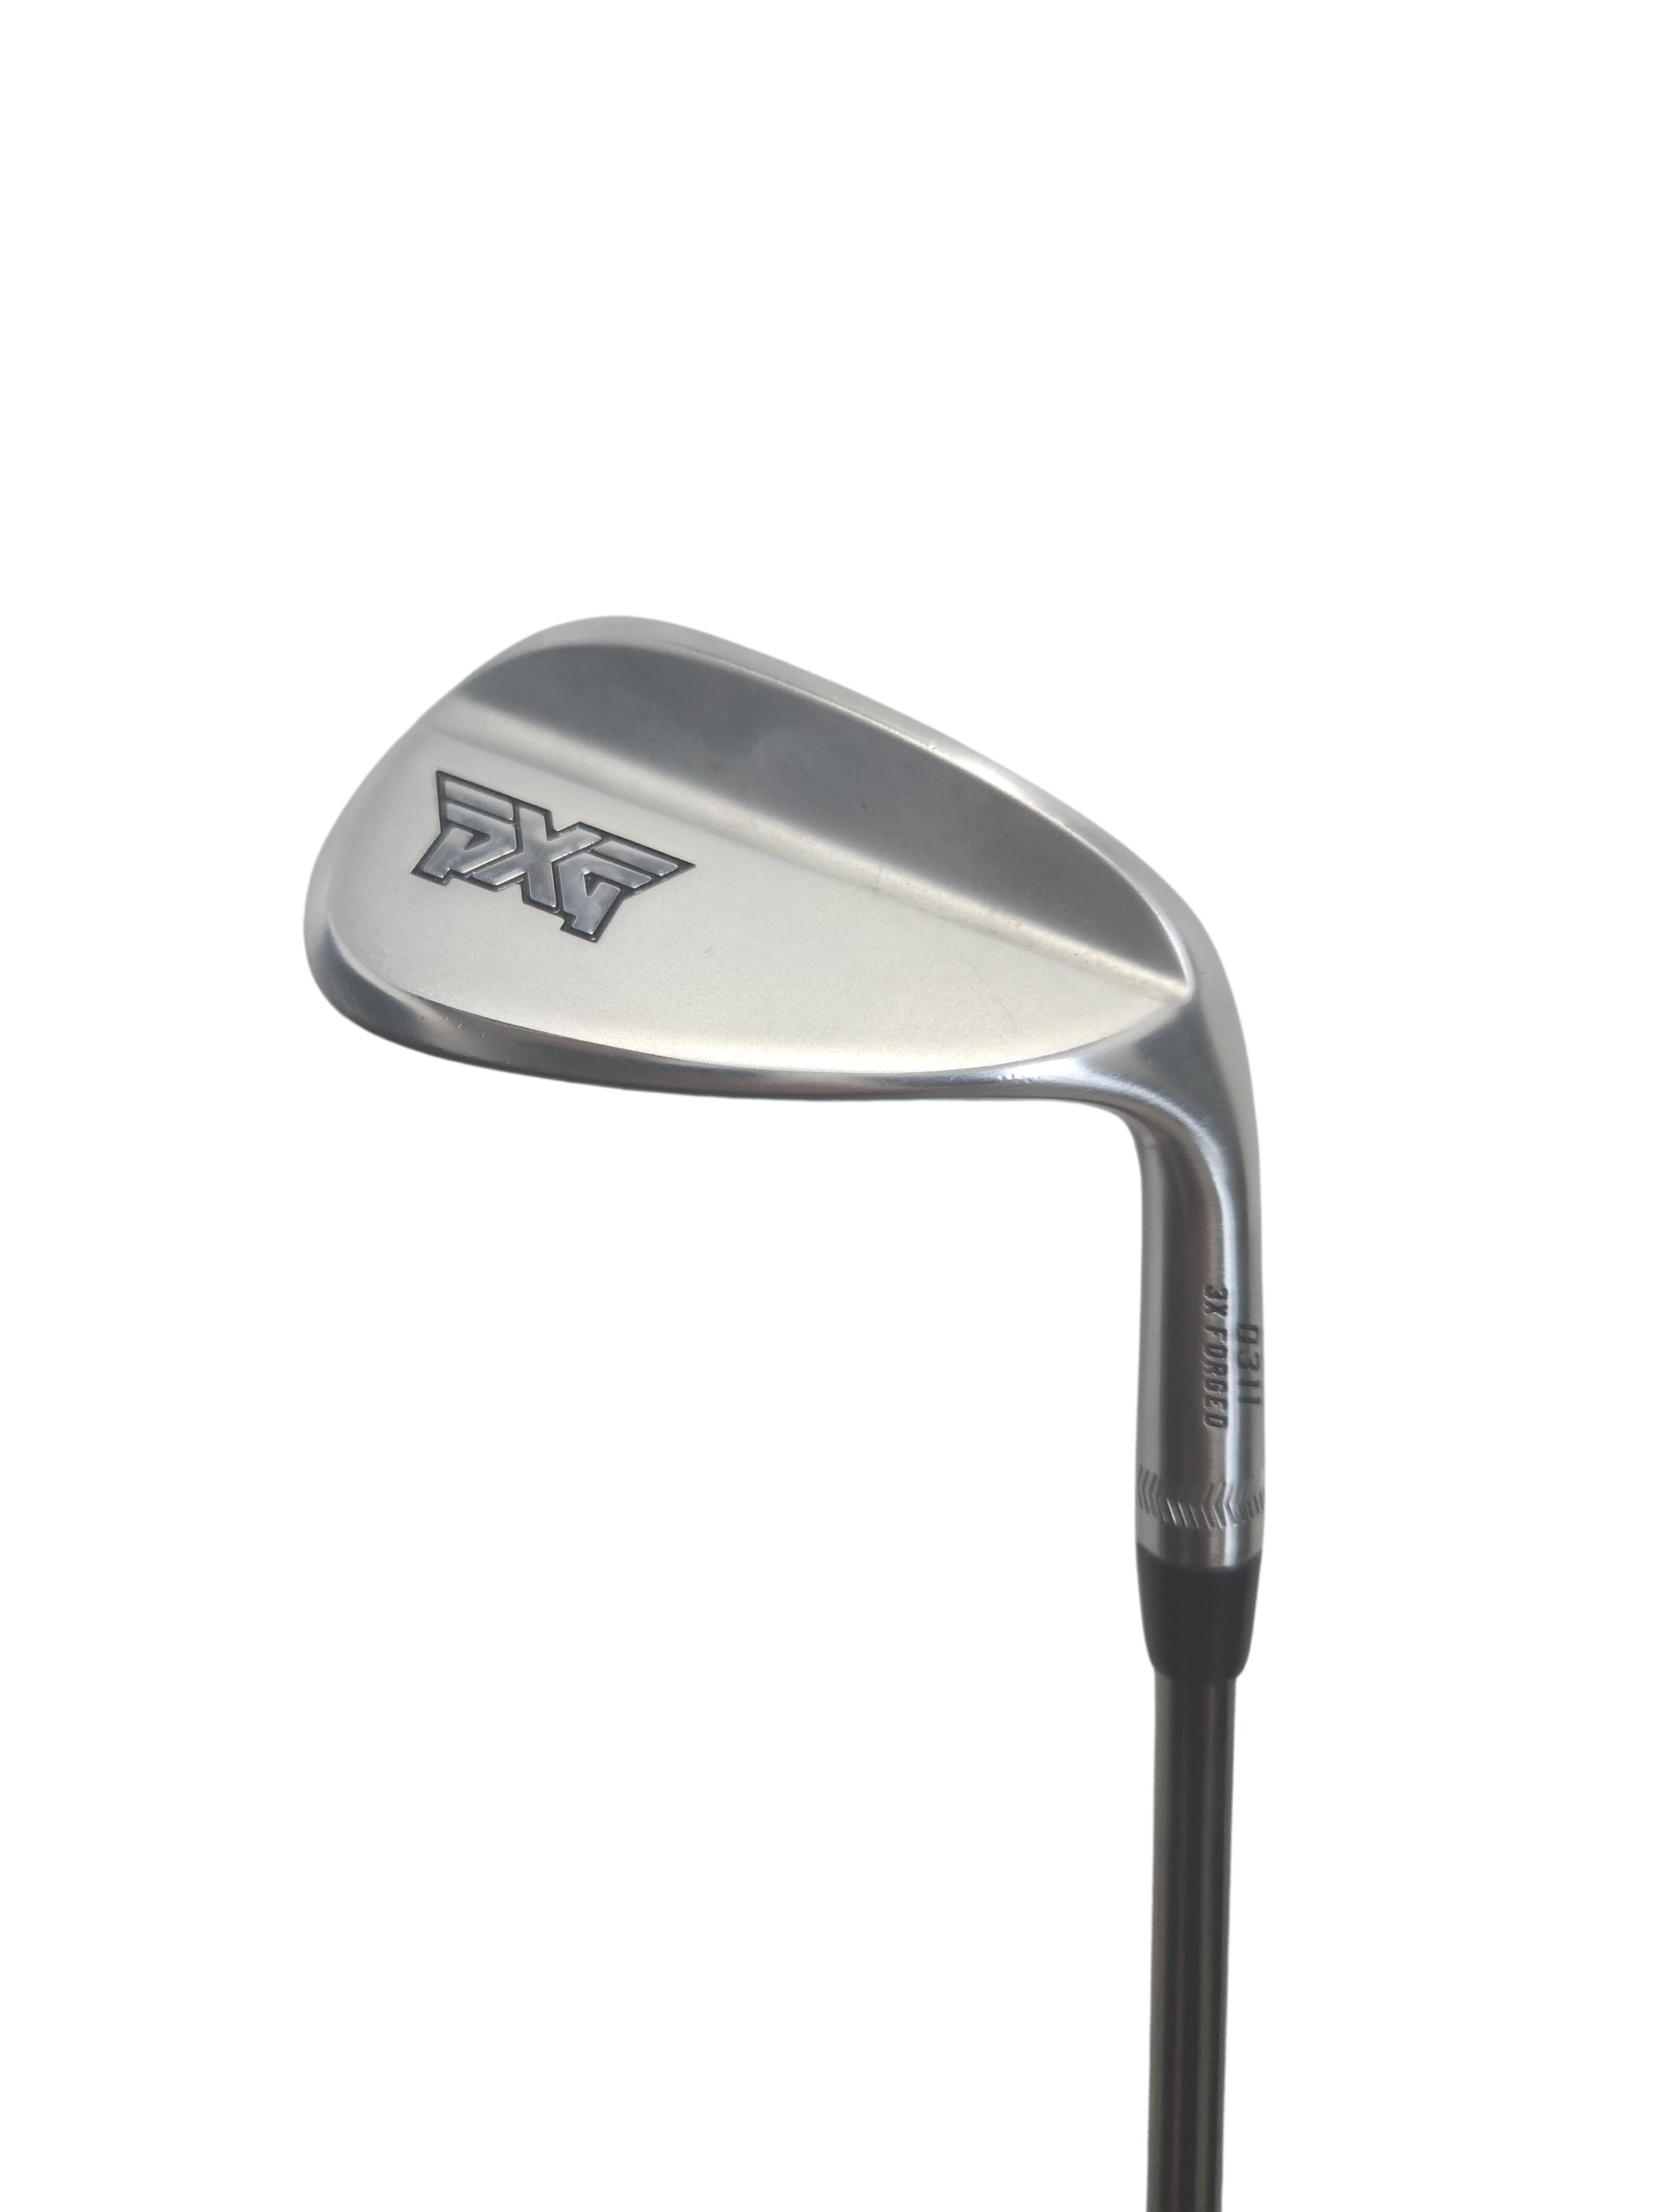 Pre-owned PXG 0311 Forged GPH Men's Regular Wedge